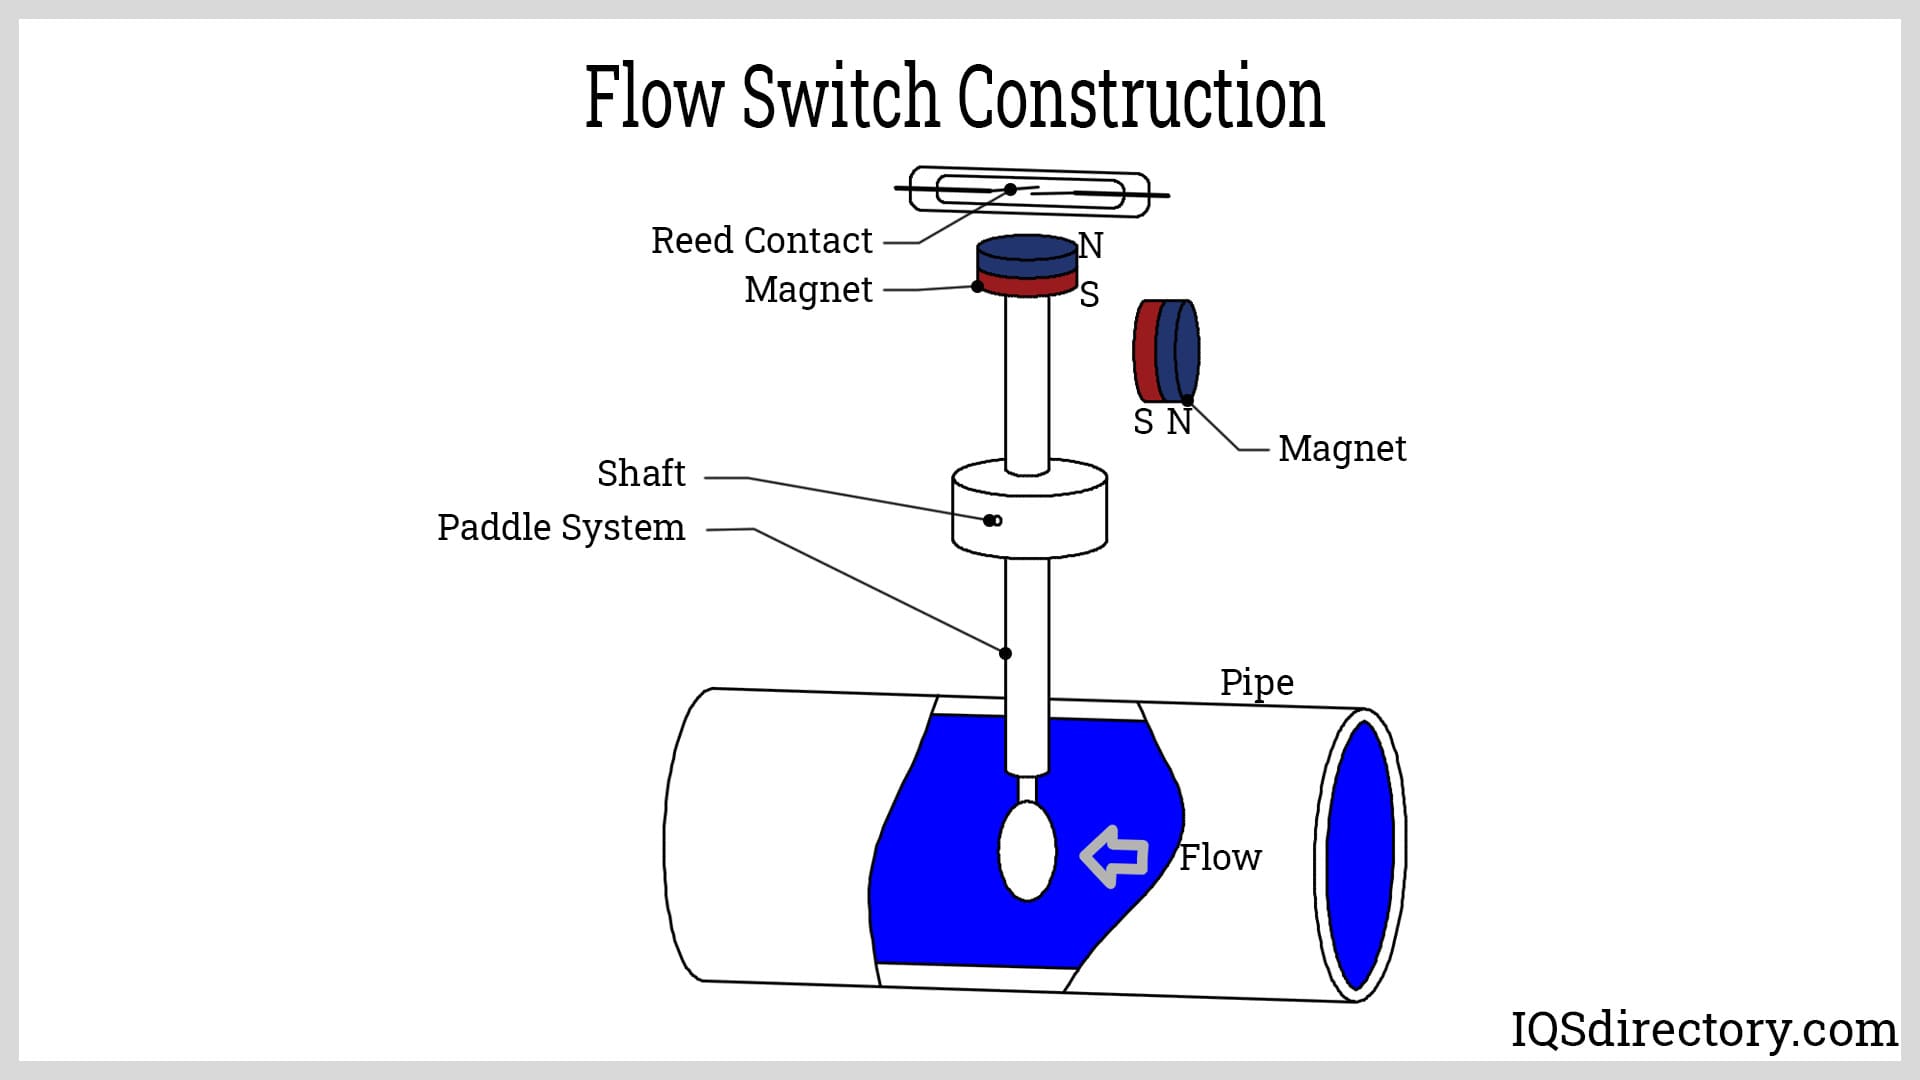 Flow Switch Construction